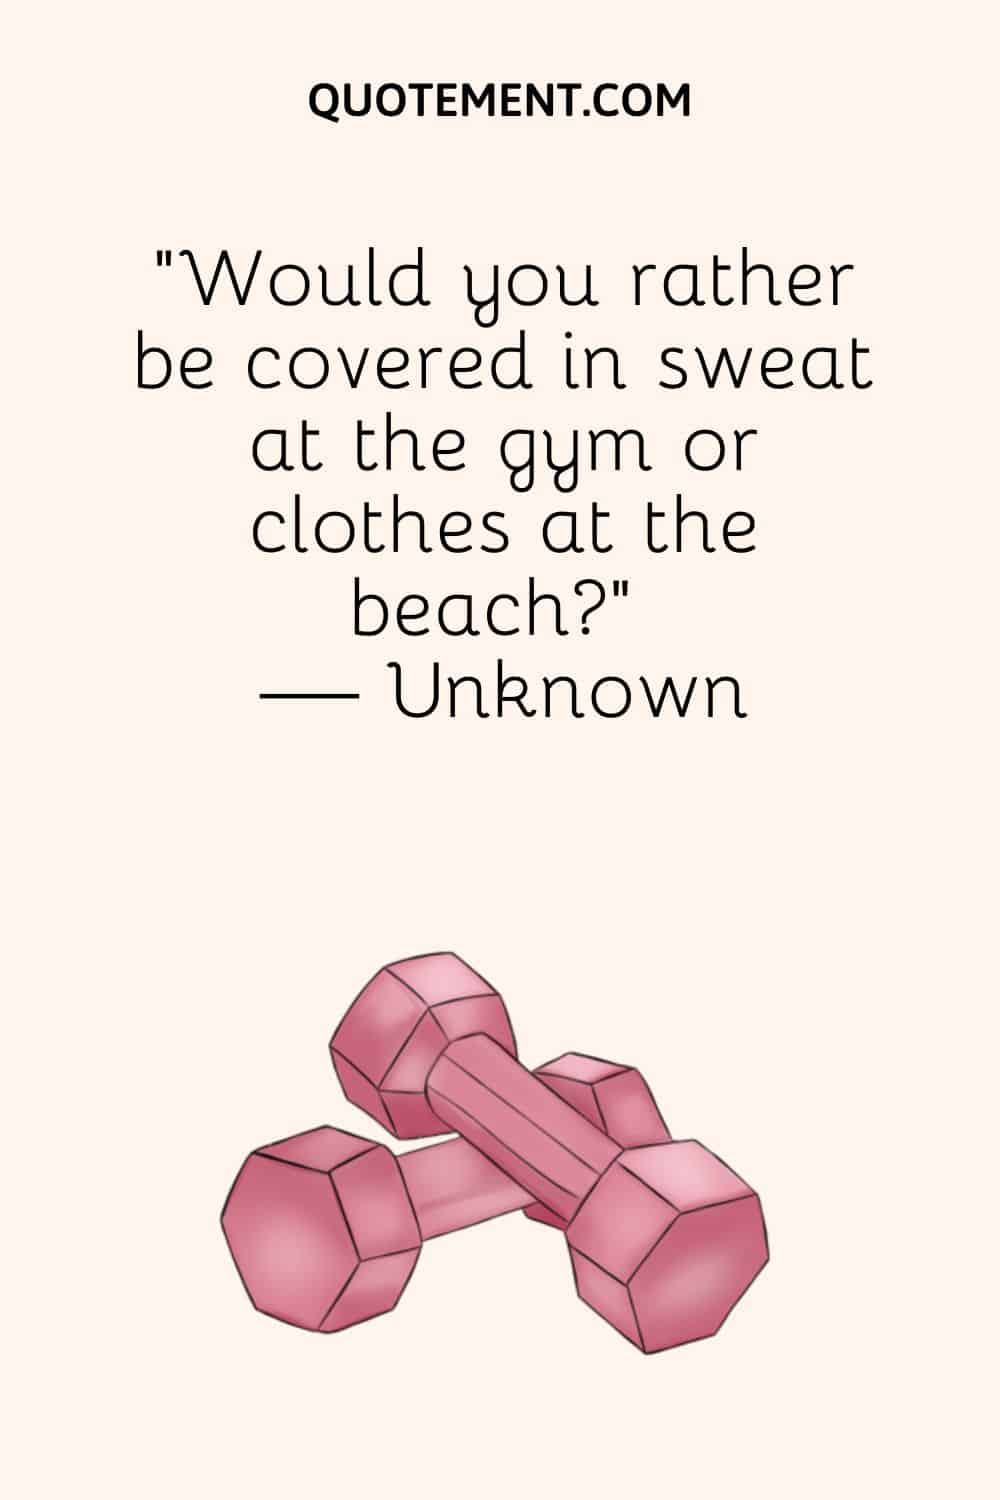 “Would you rather be covered in sweat at the gym or clothes at the beach” — Unknown